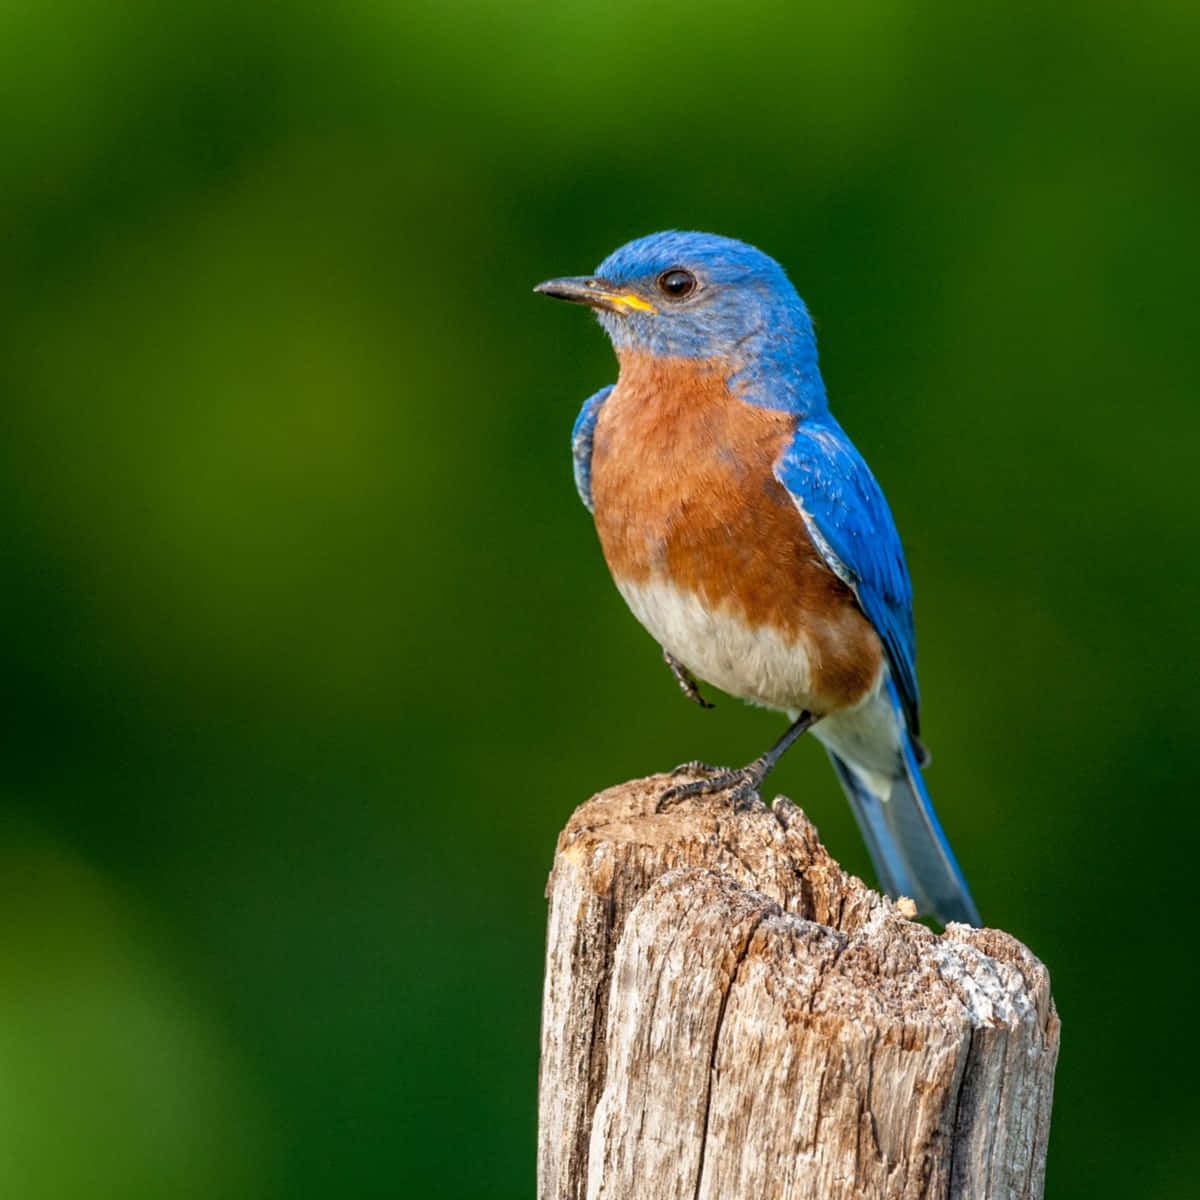 A bright turquoise Bluebird